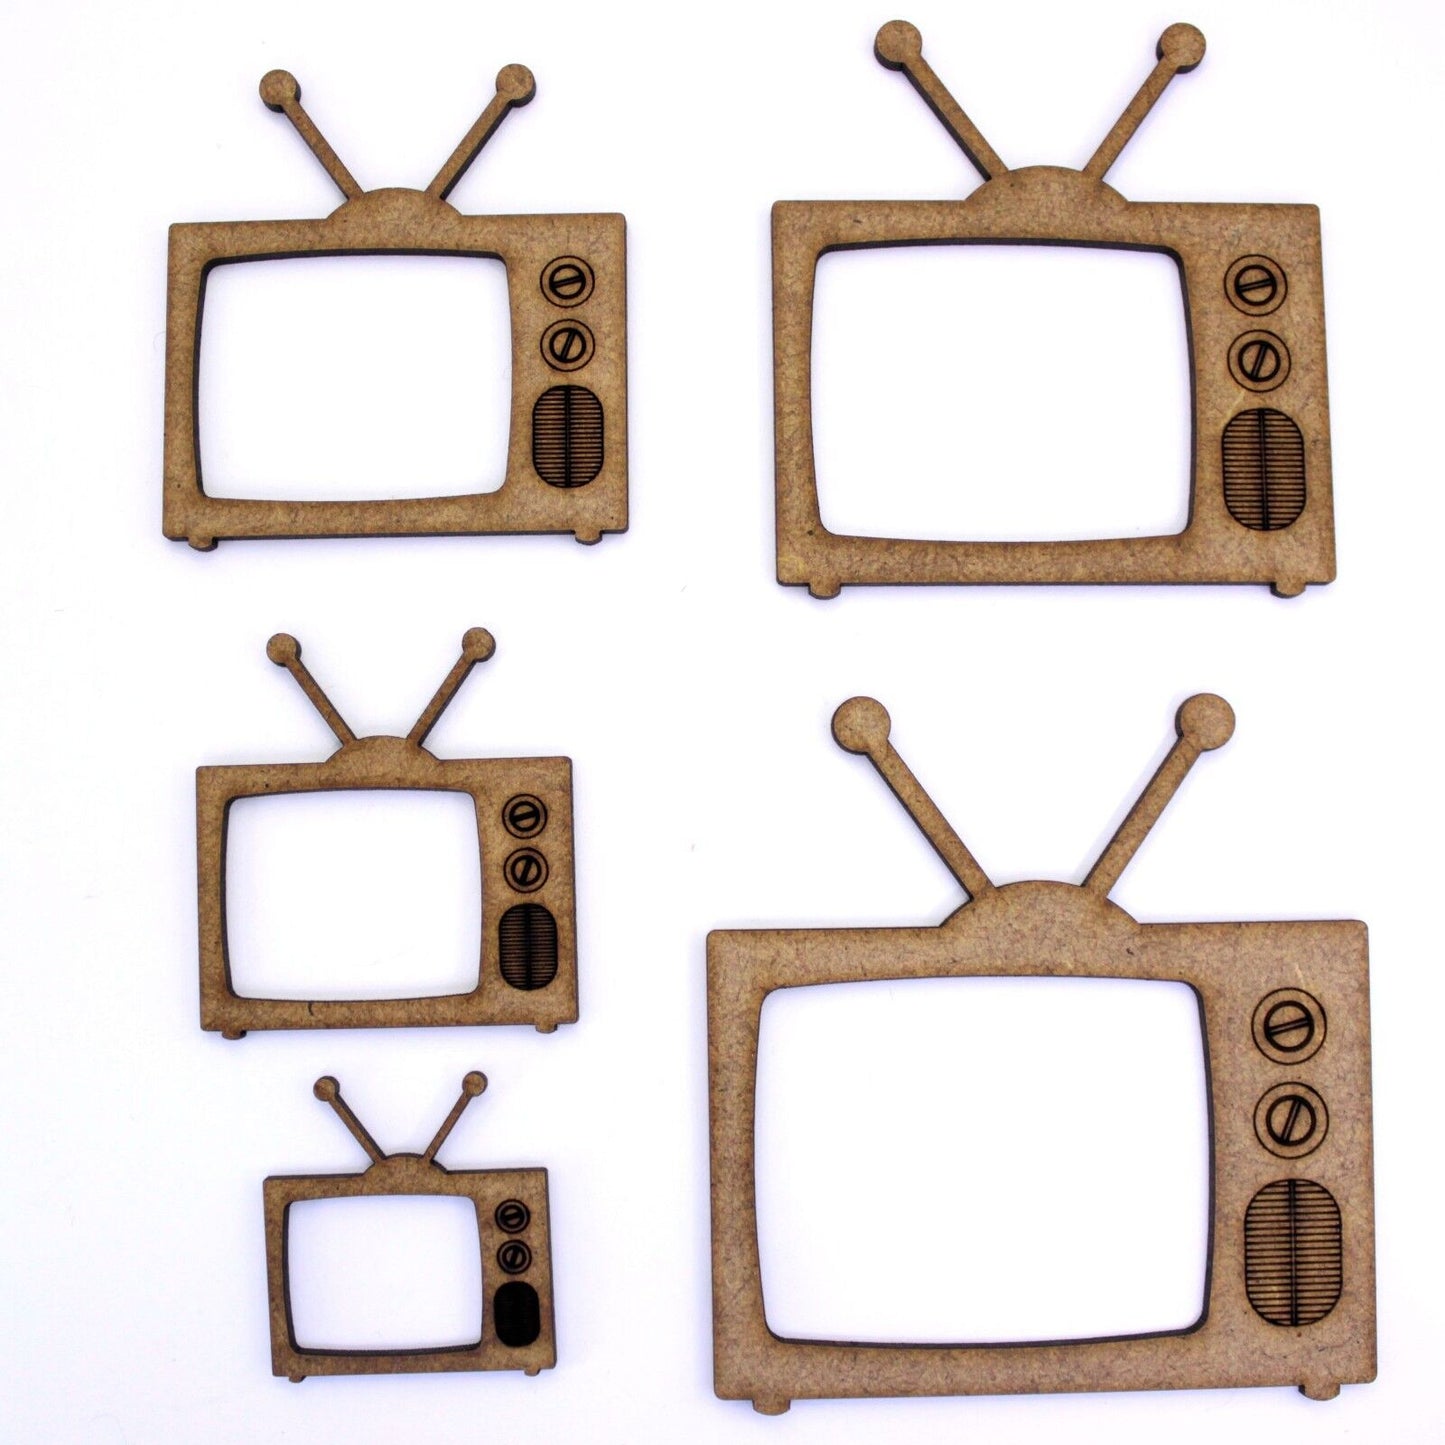 Retro TV with Aerial Craft Shape Blank, Various Sizes, 2mm MDF Wood. Television